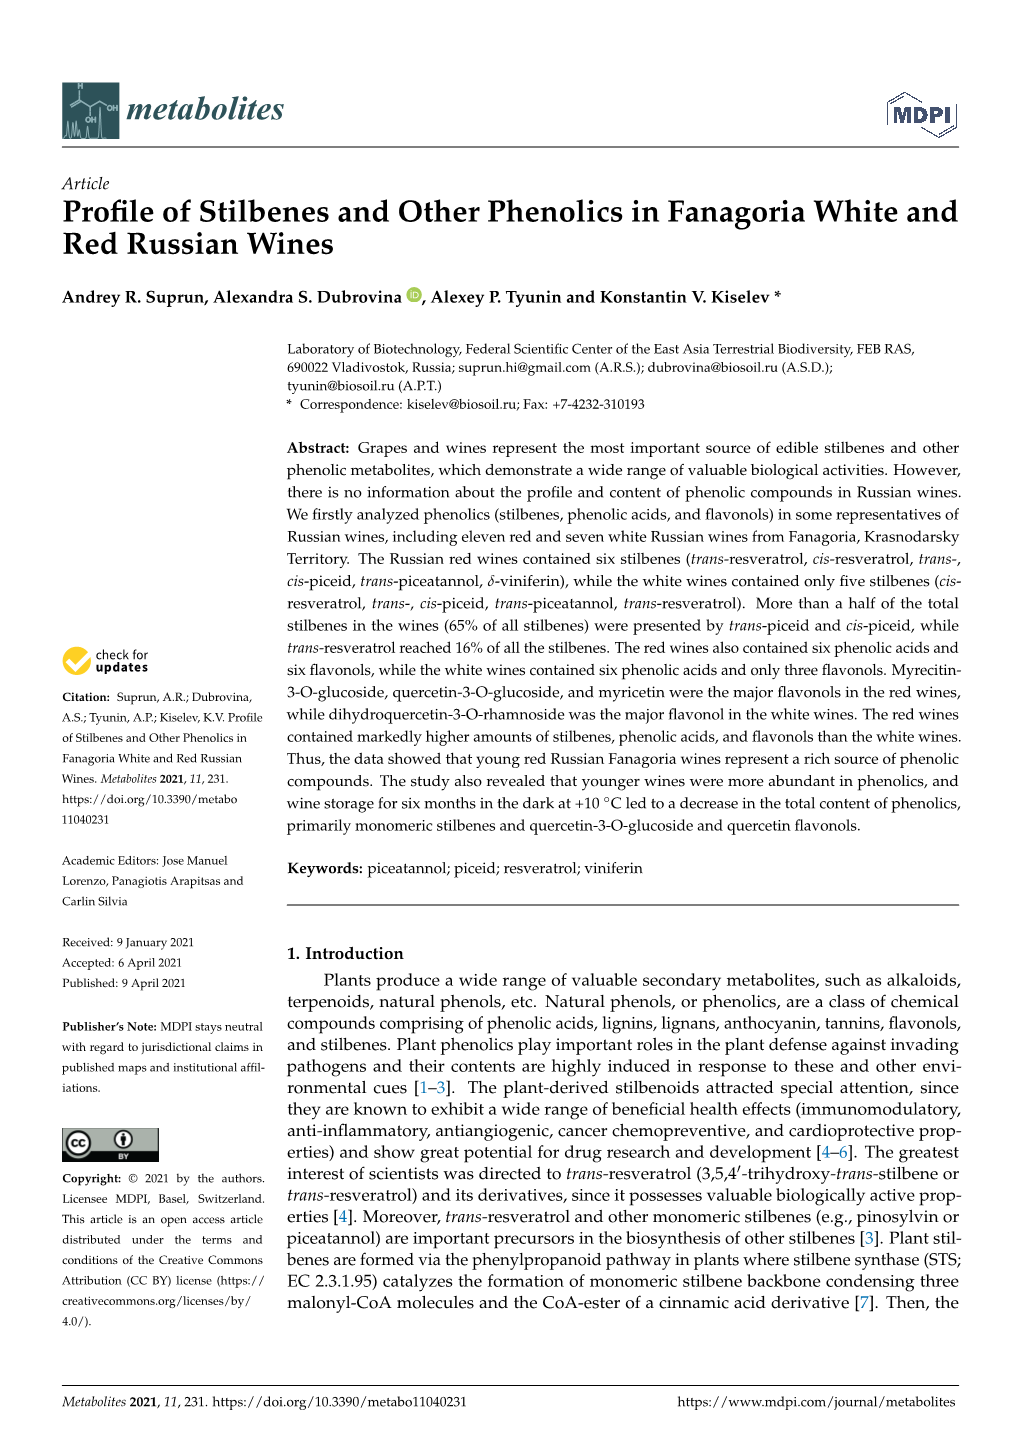 Profile of Stilbenes and Other Phenolics in Fanagoria White and Red Russian Wines